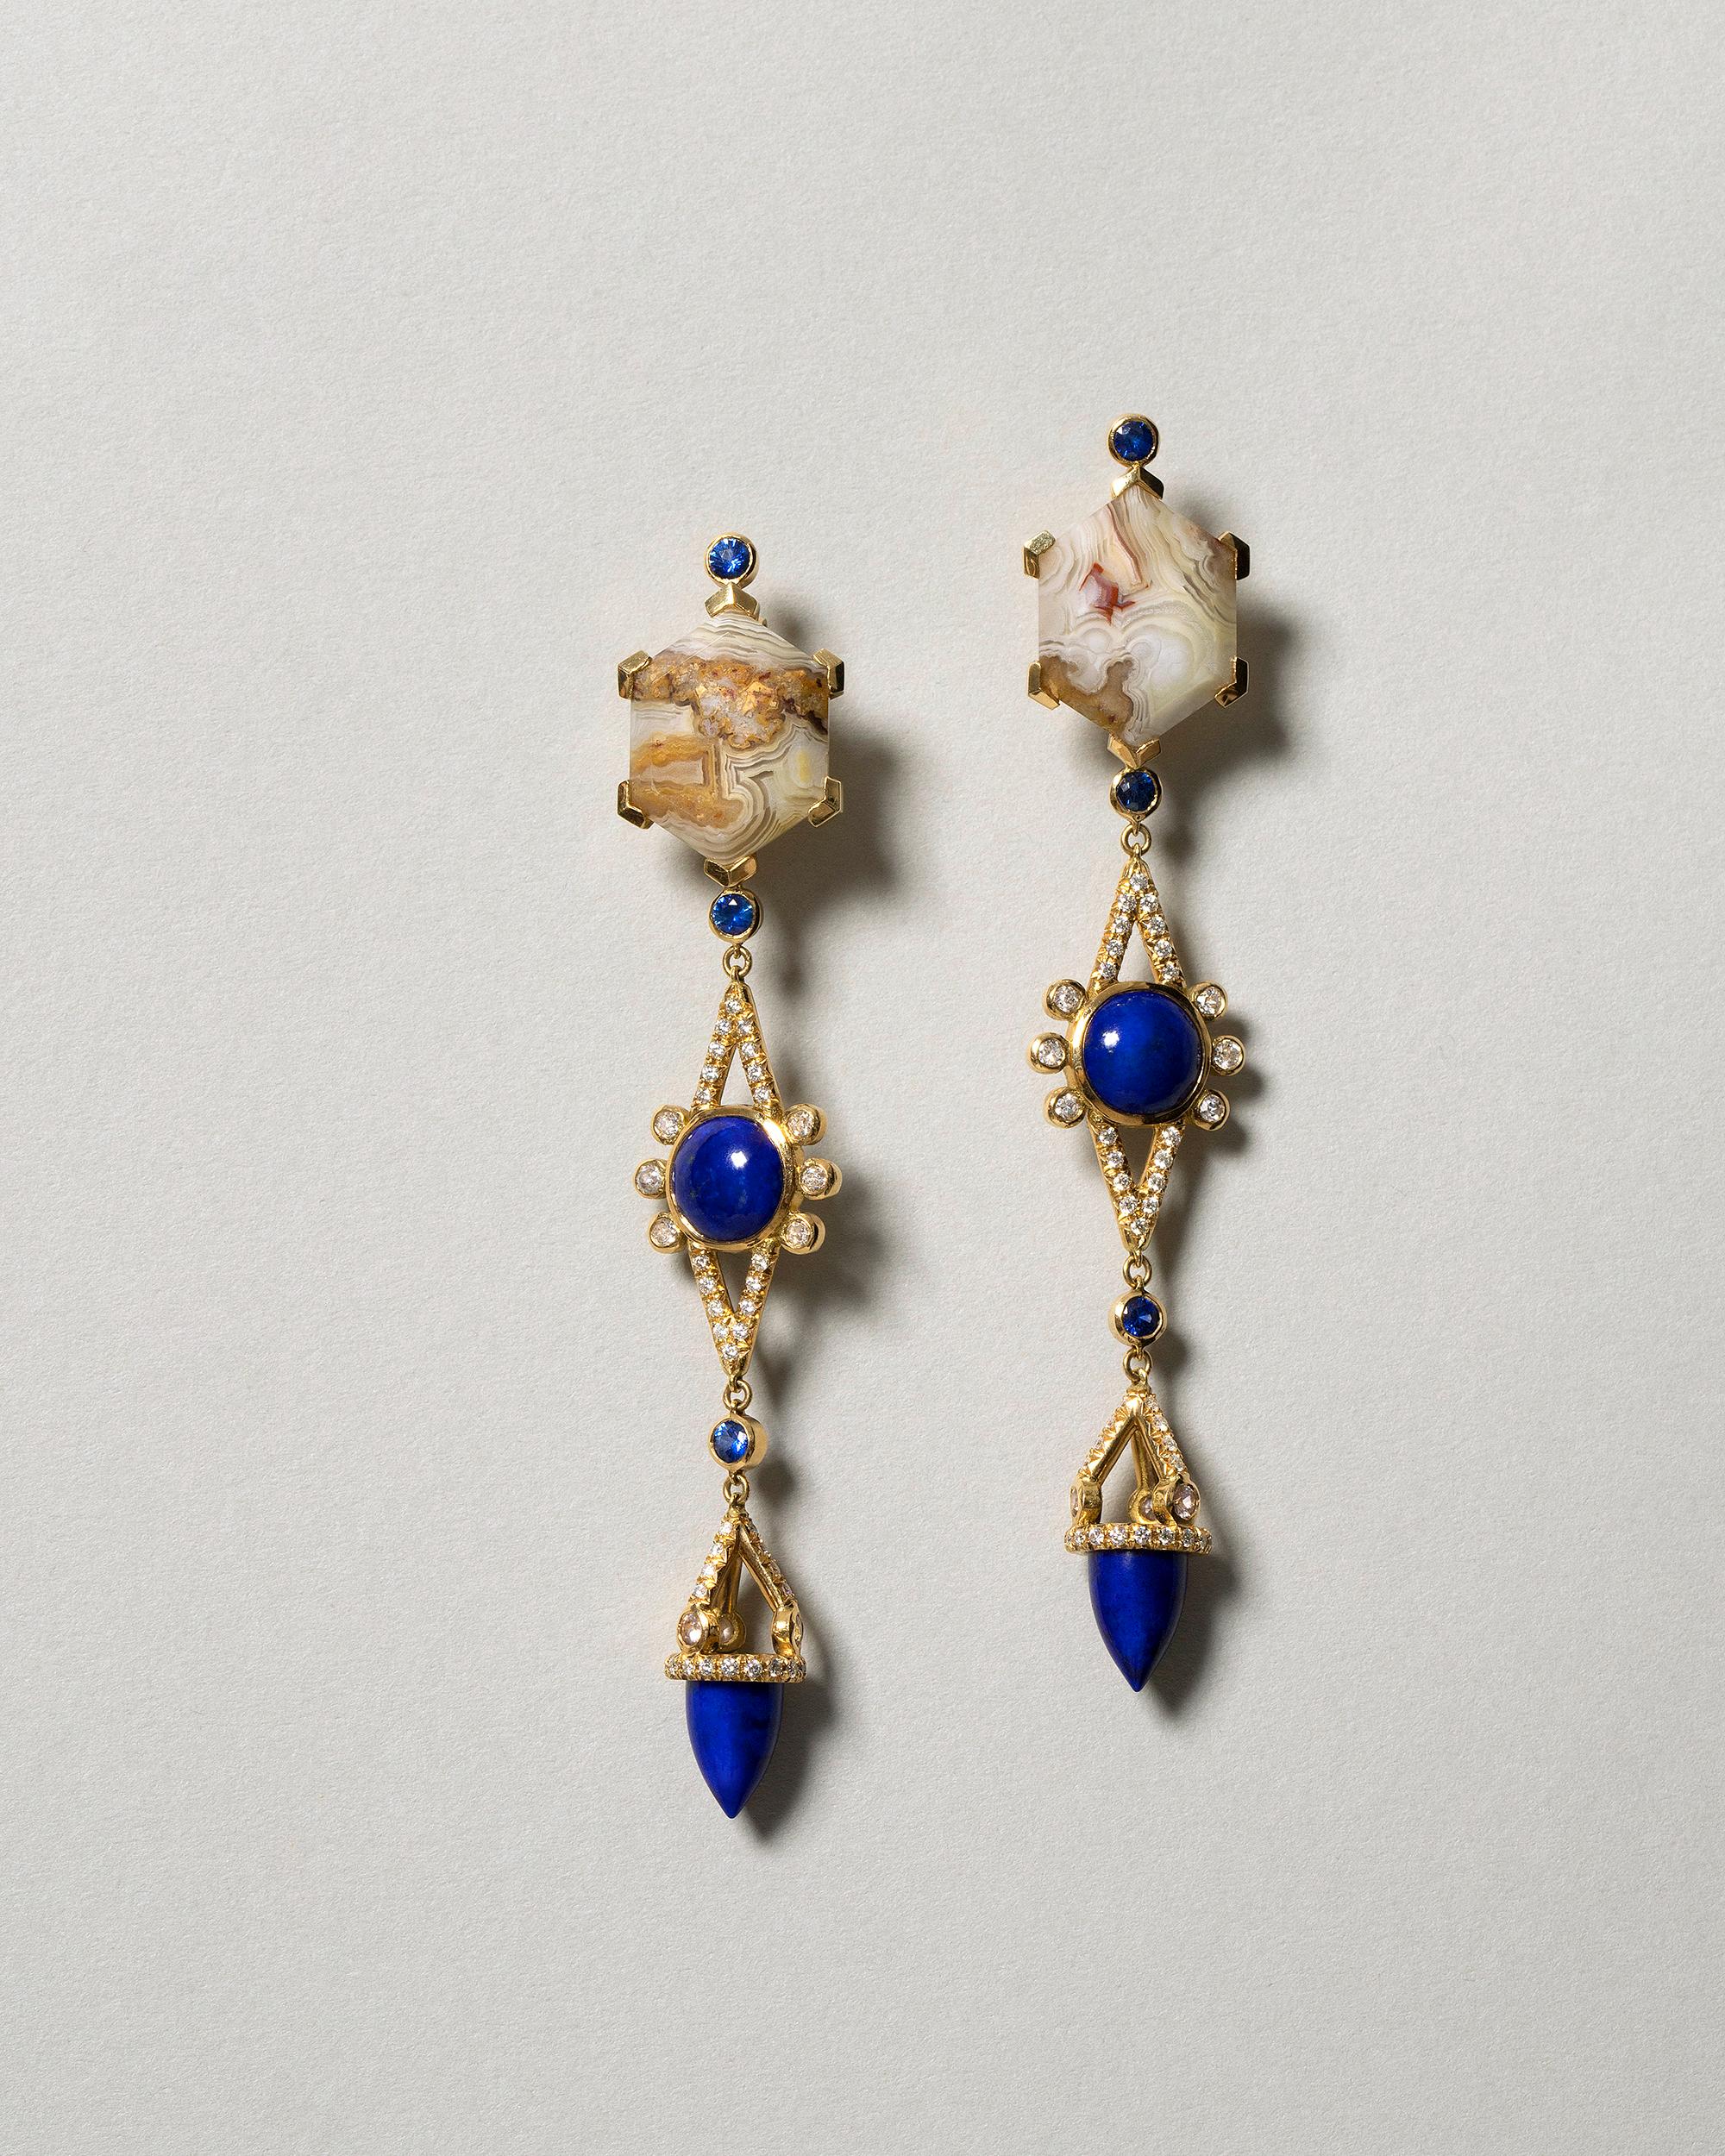 One of a kind earrings
2 lace agate hexagons have a total gem weight of 12.76ct

6 blue sapphires have a total gem weight of .45ct

2 round lapis cabochons have a total gem weight of 3.62ct

2 bullet cut lapis have a total gem weight of 4.67ct

23